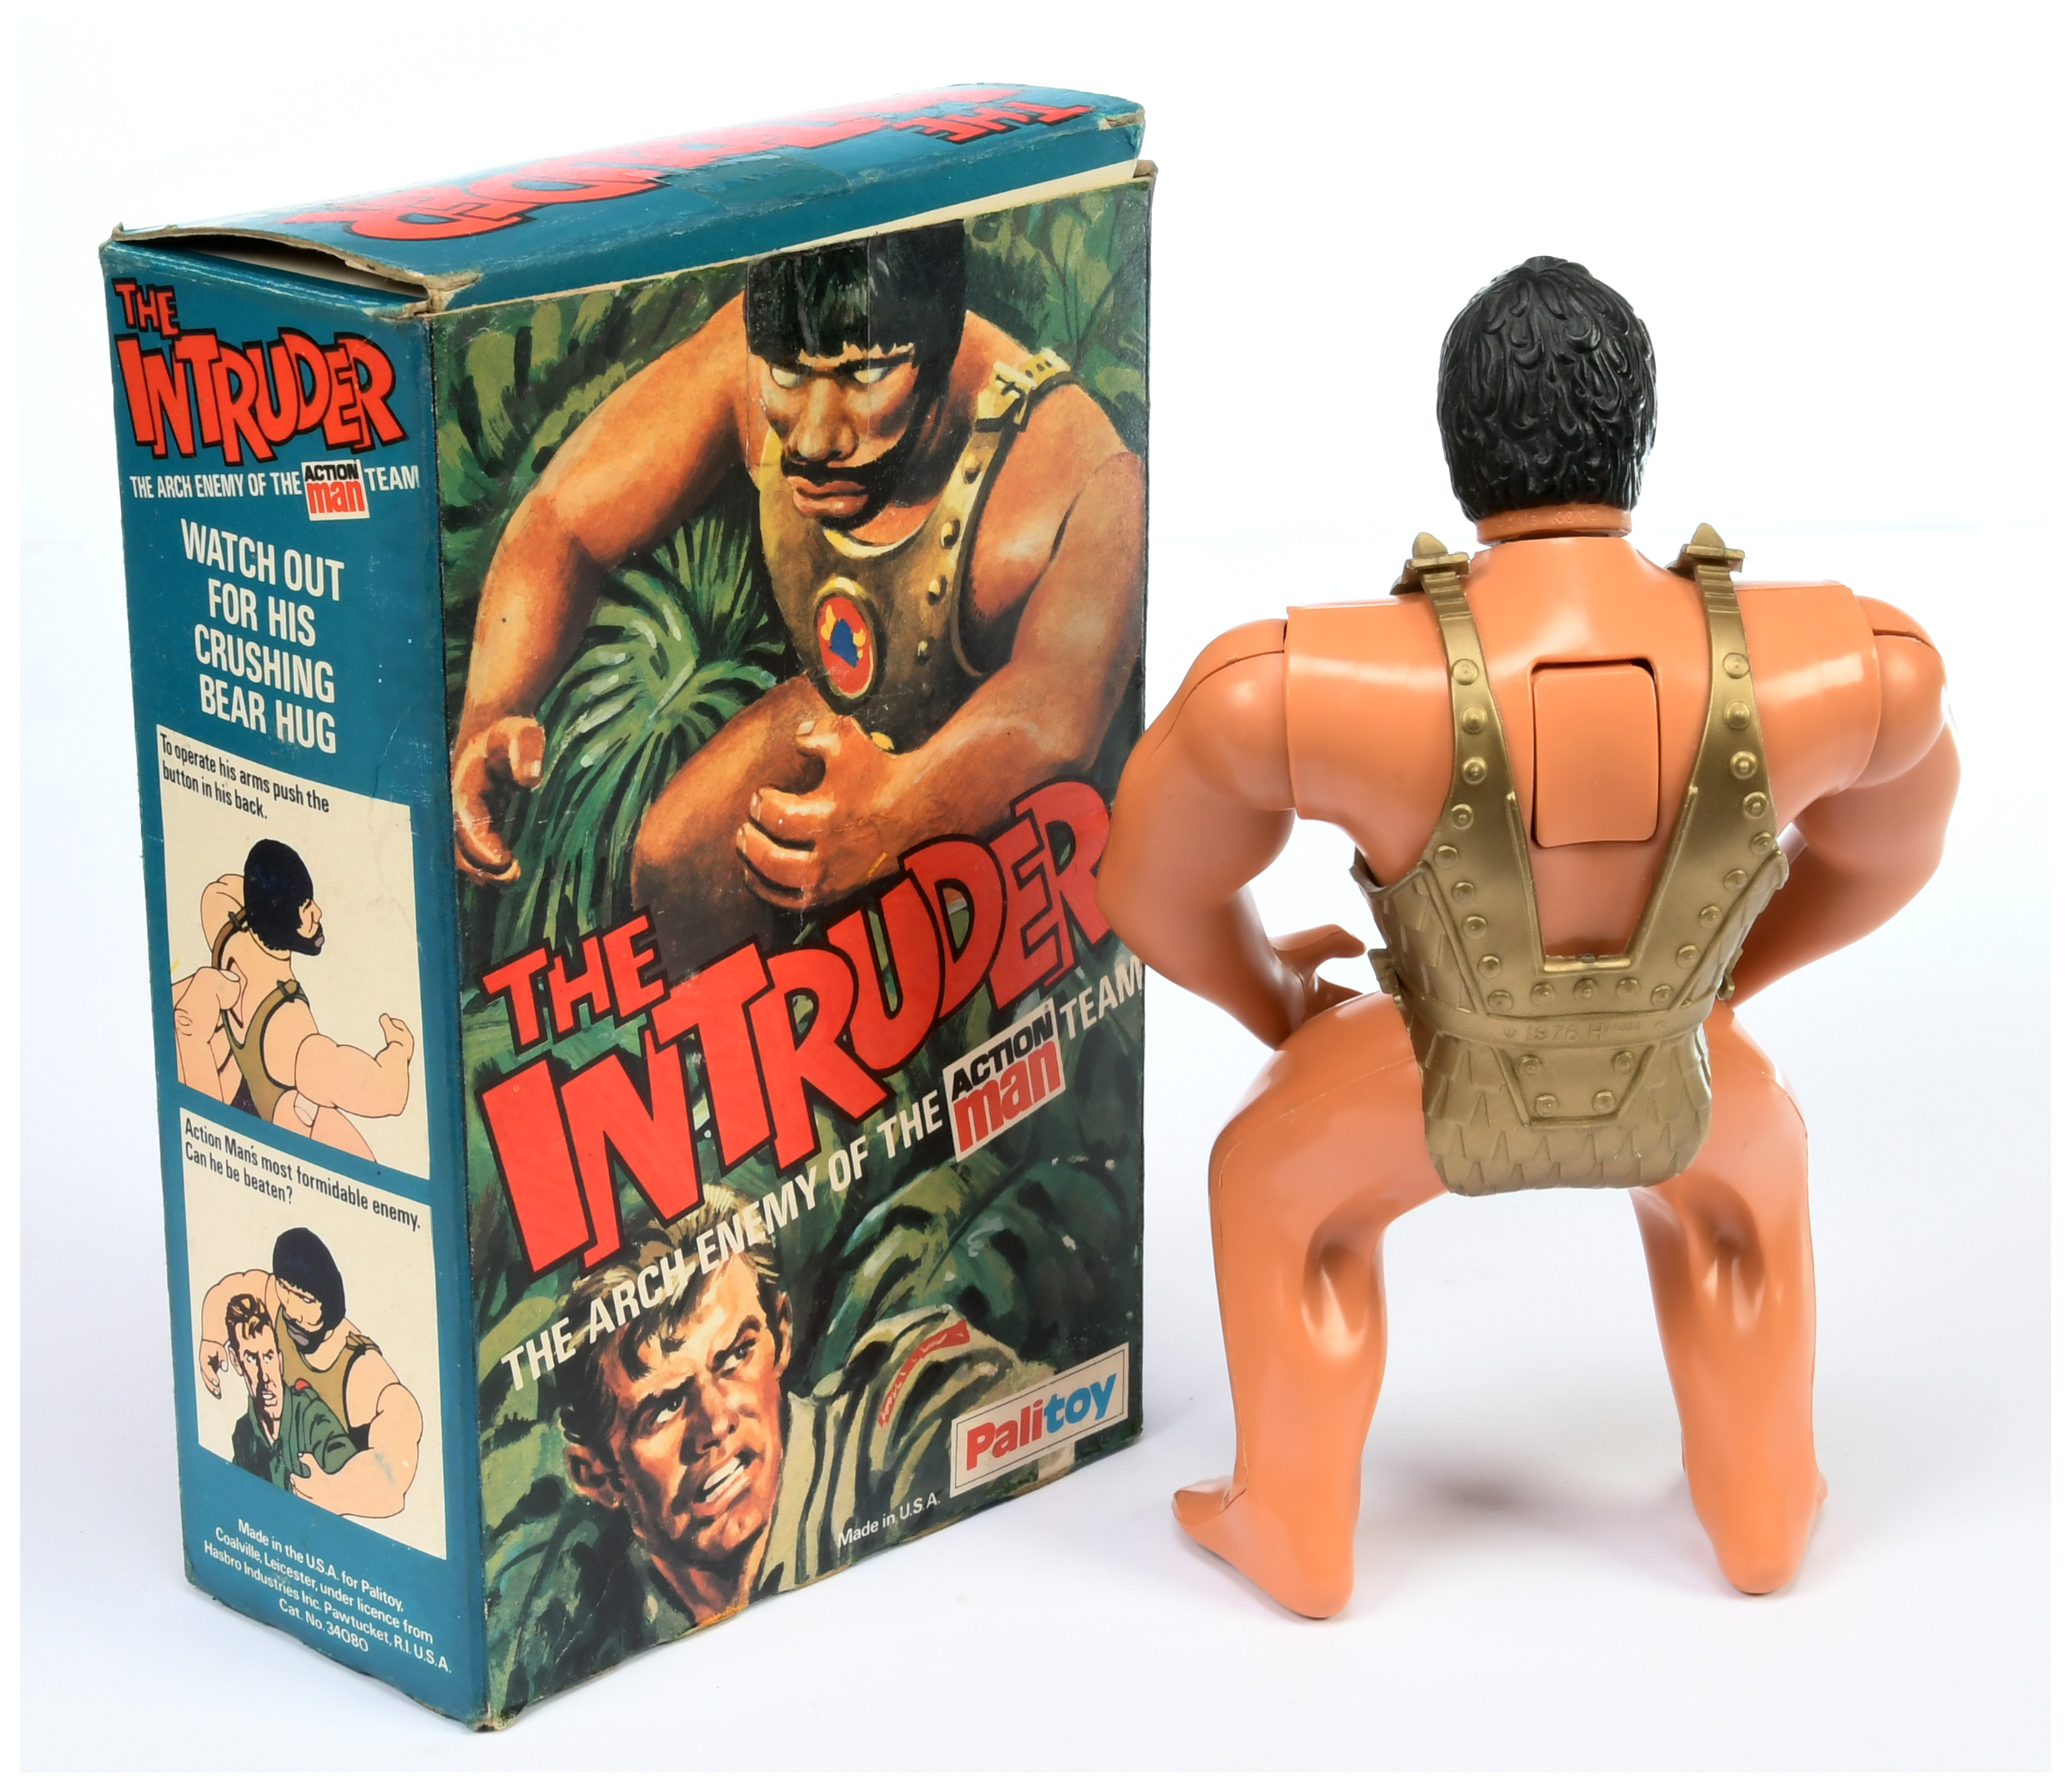 Palitoy Action Man vintage 34080 The Intruder figure, Good Plus, within Good box. - Image 2 of 2